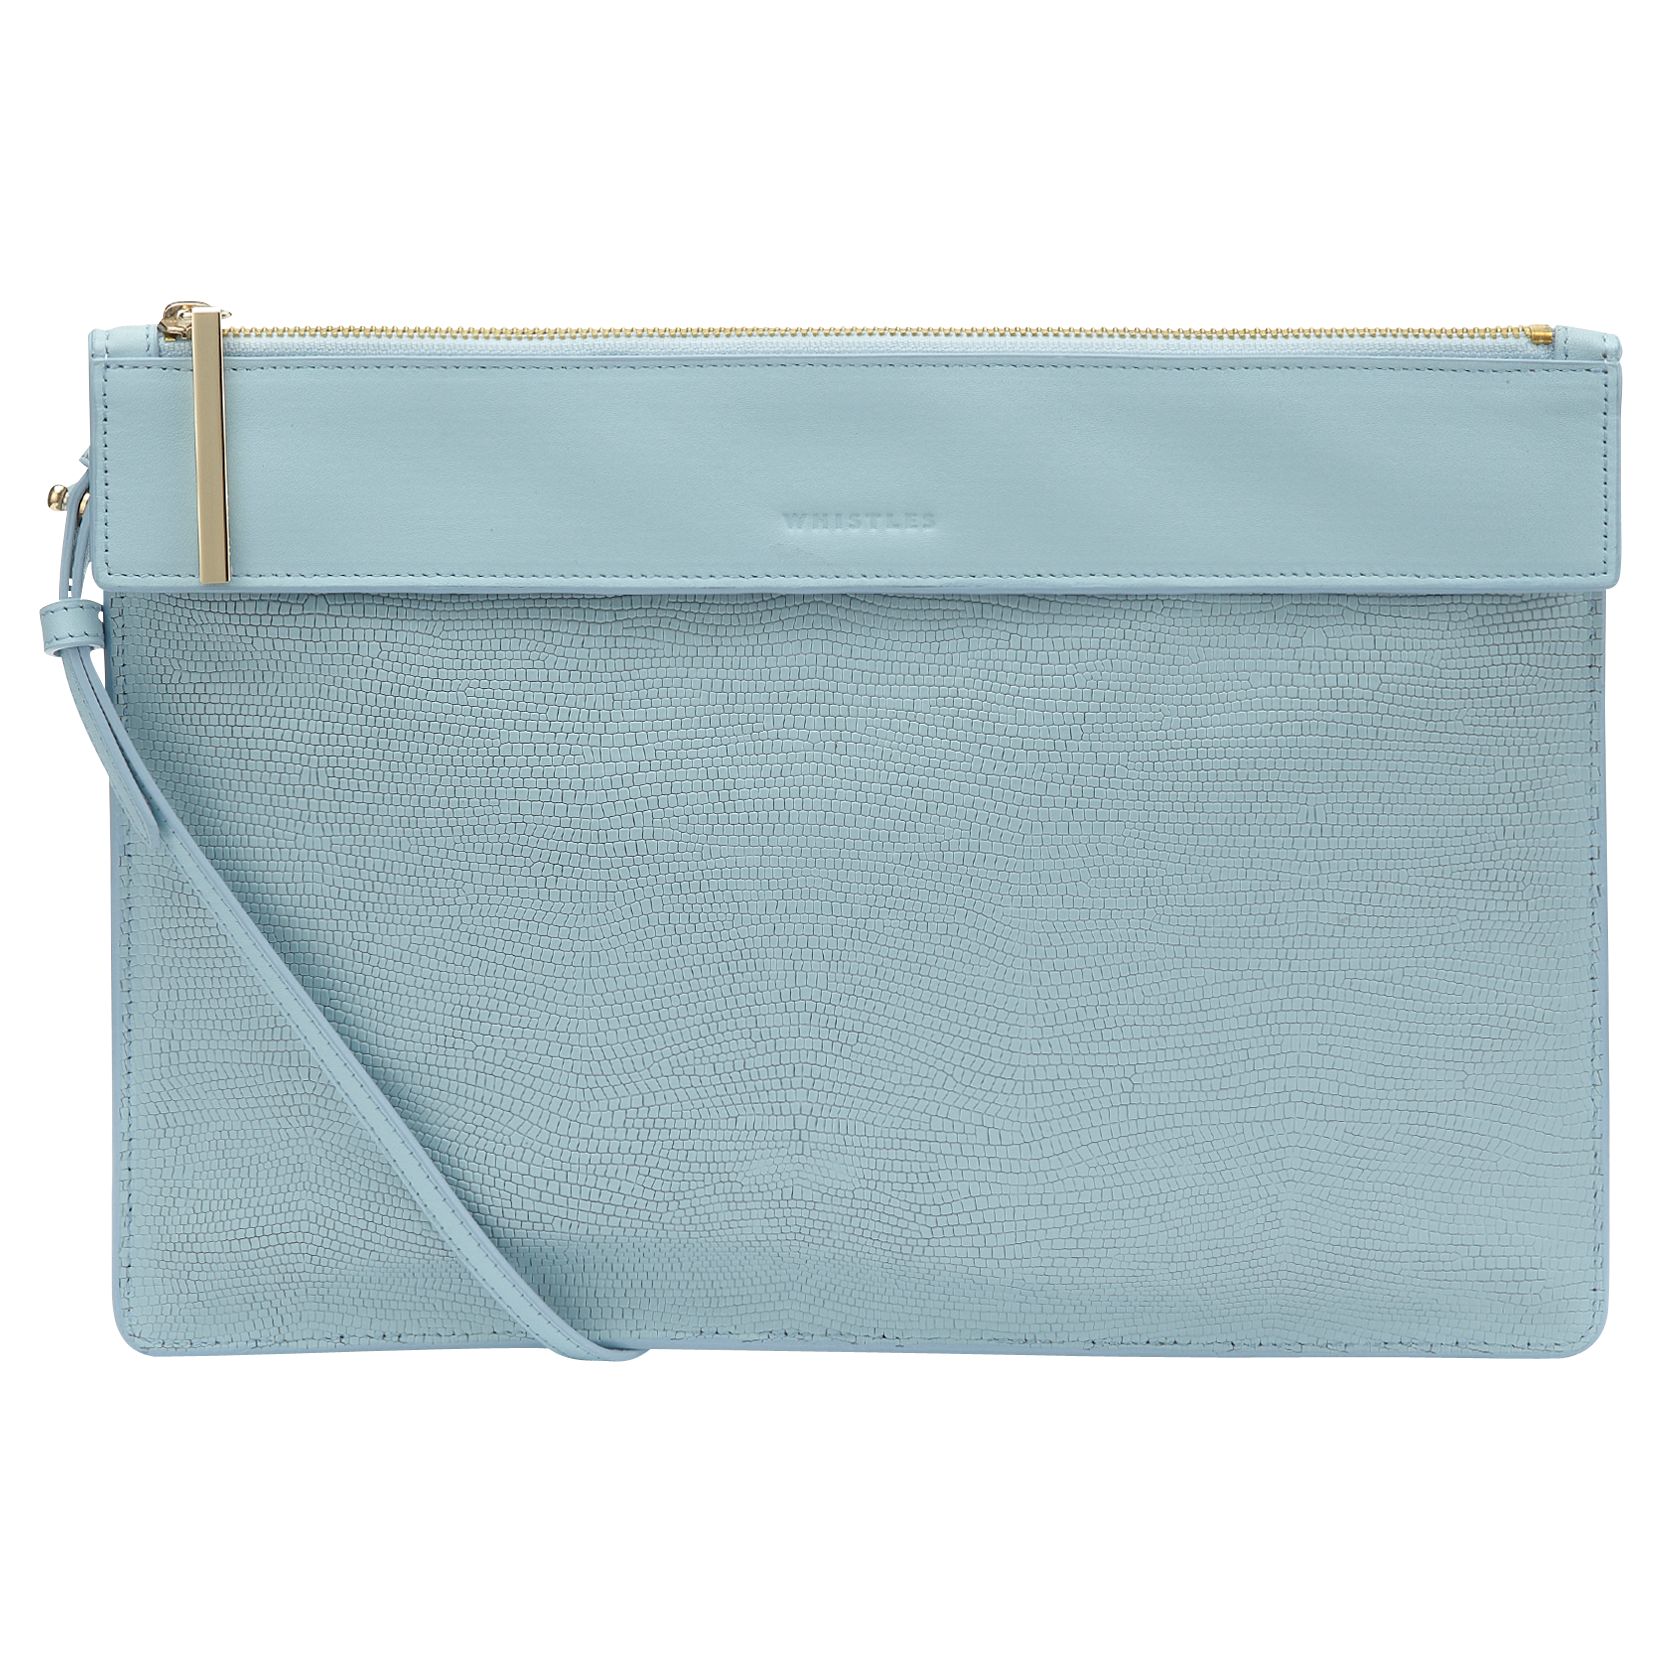 Whistles Olivia Leather Strap Clutch Bag, Pale Blue at John Lewis & Partners